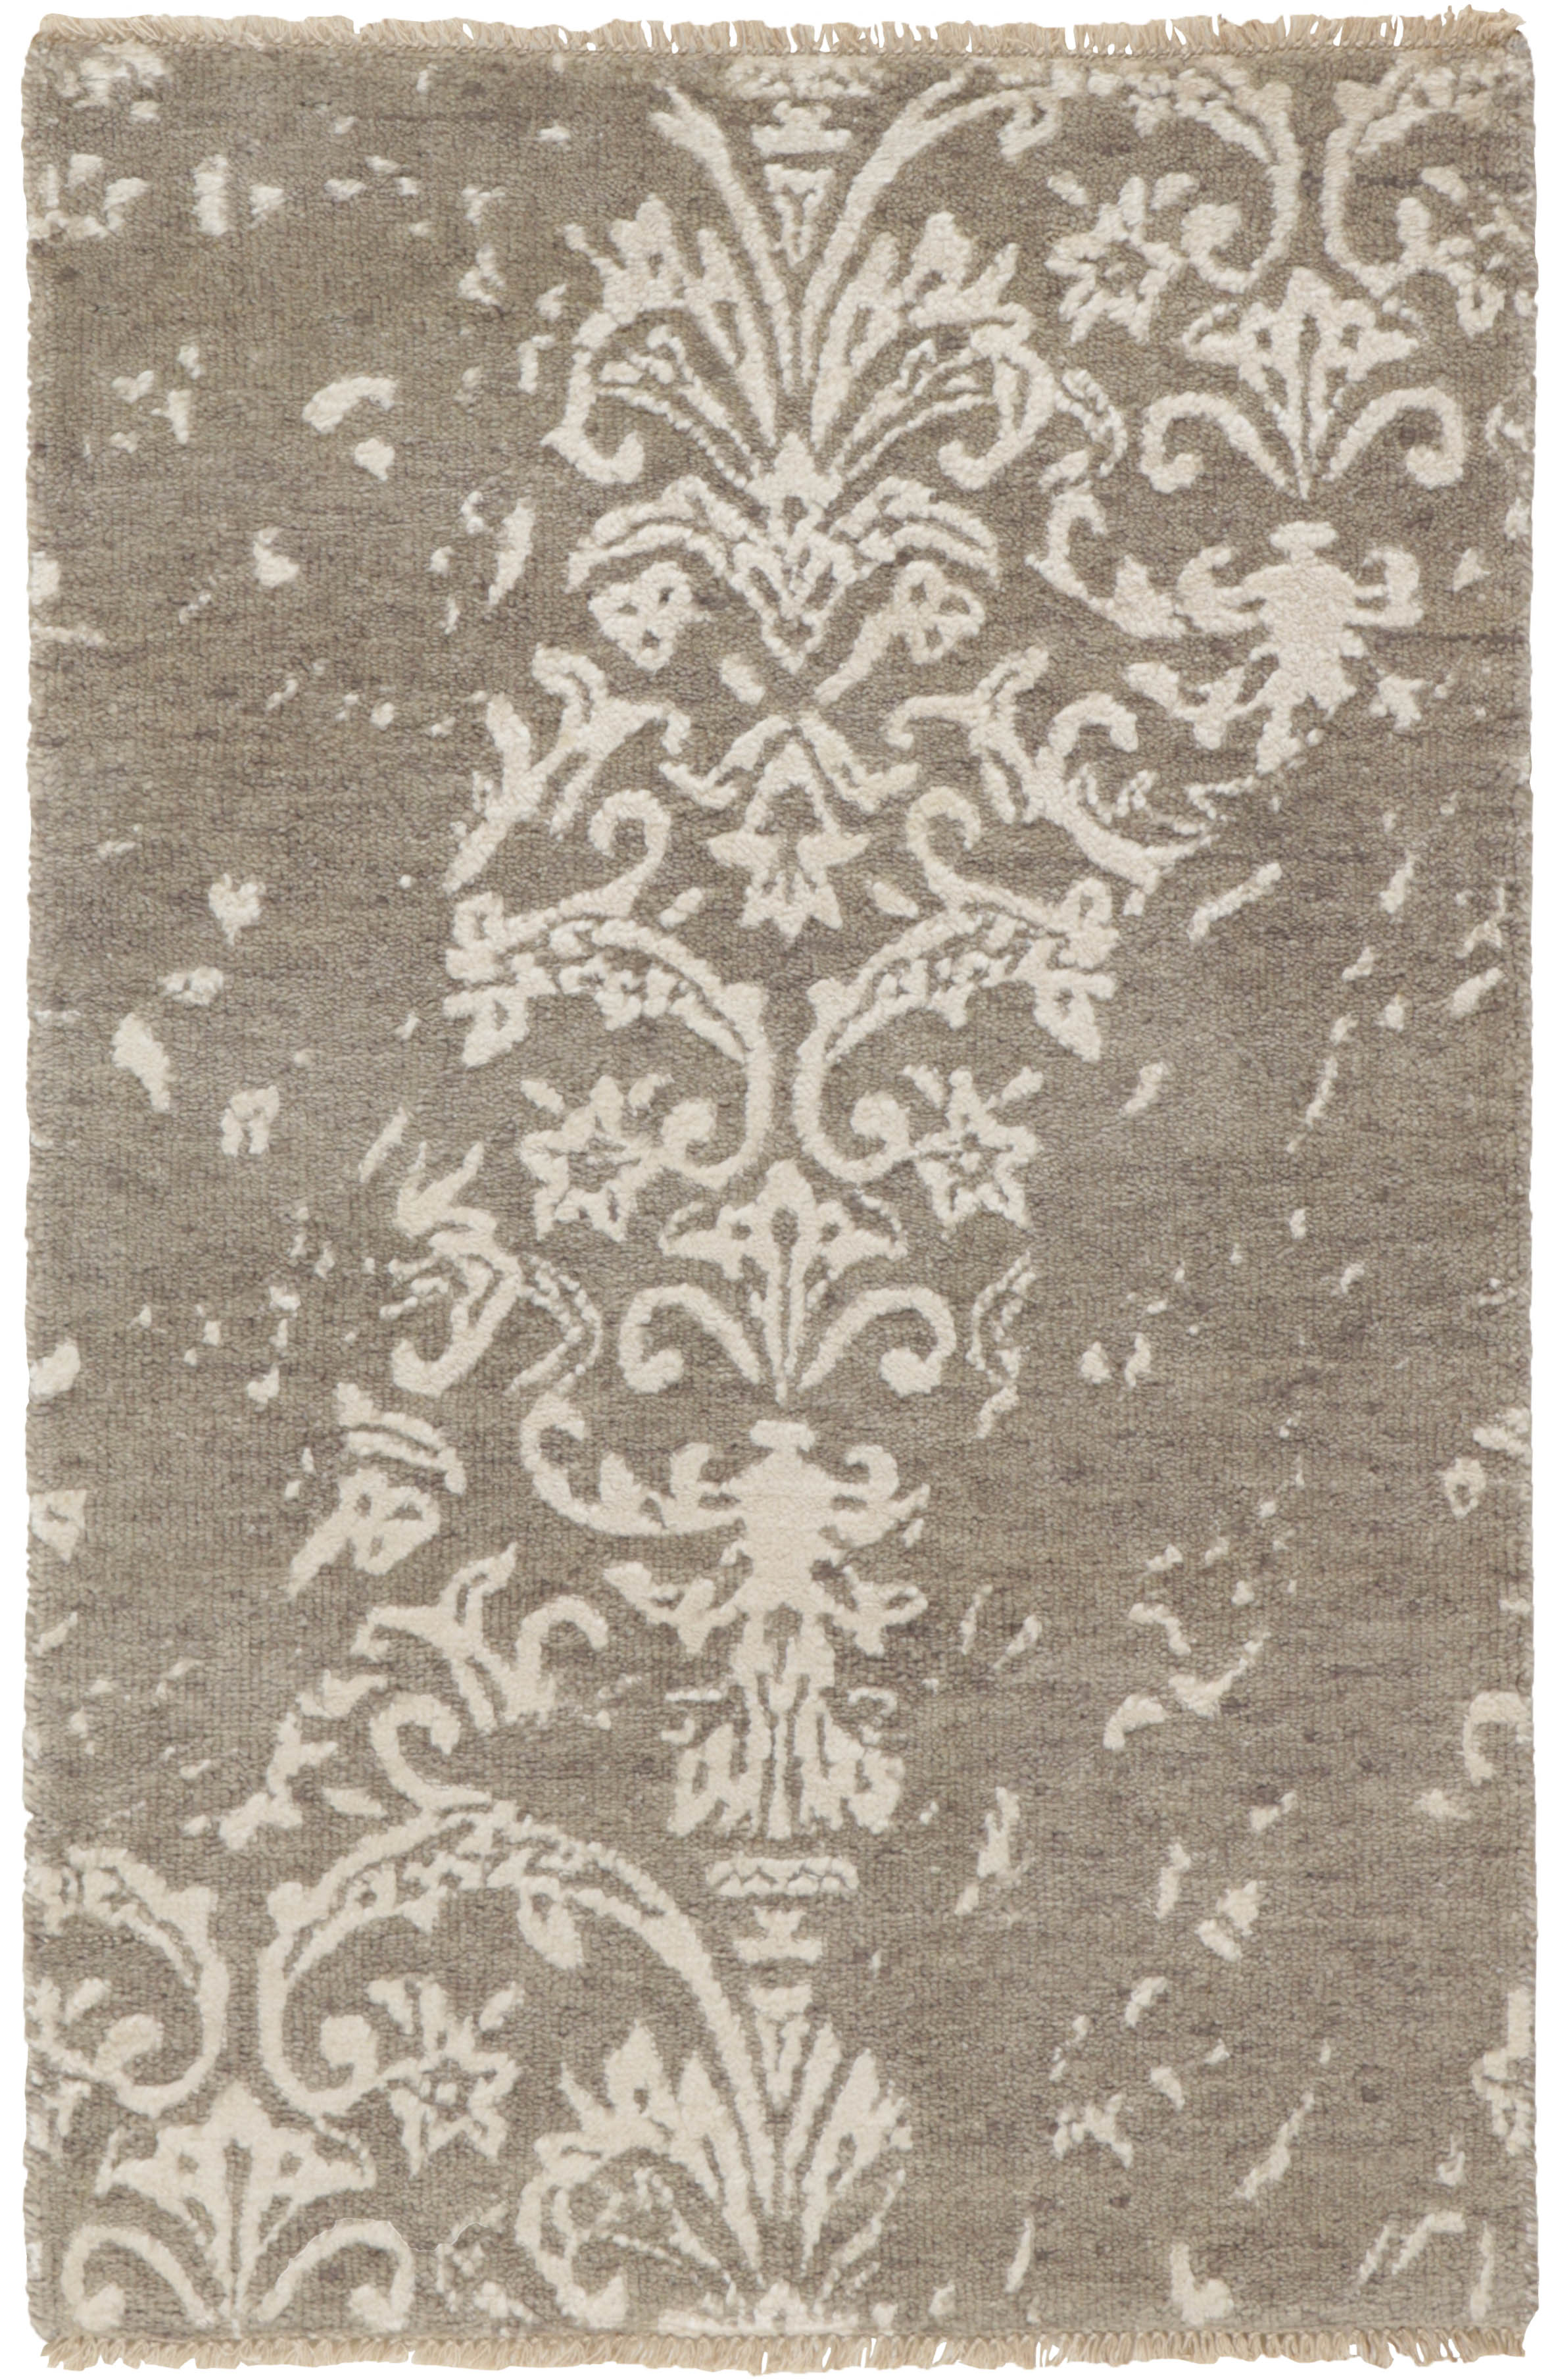 Authentic oriental rug with a damask pattern in beige and ivory